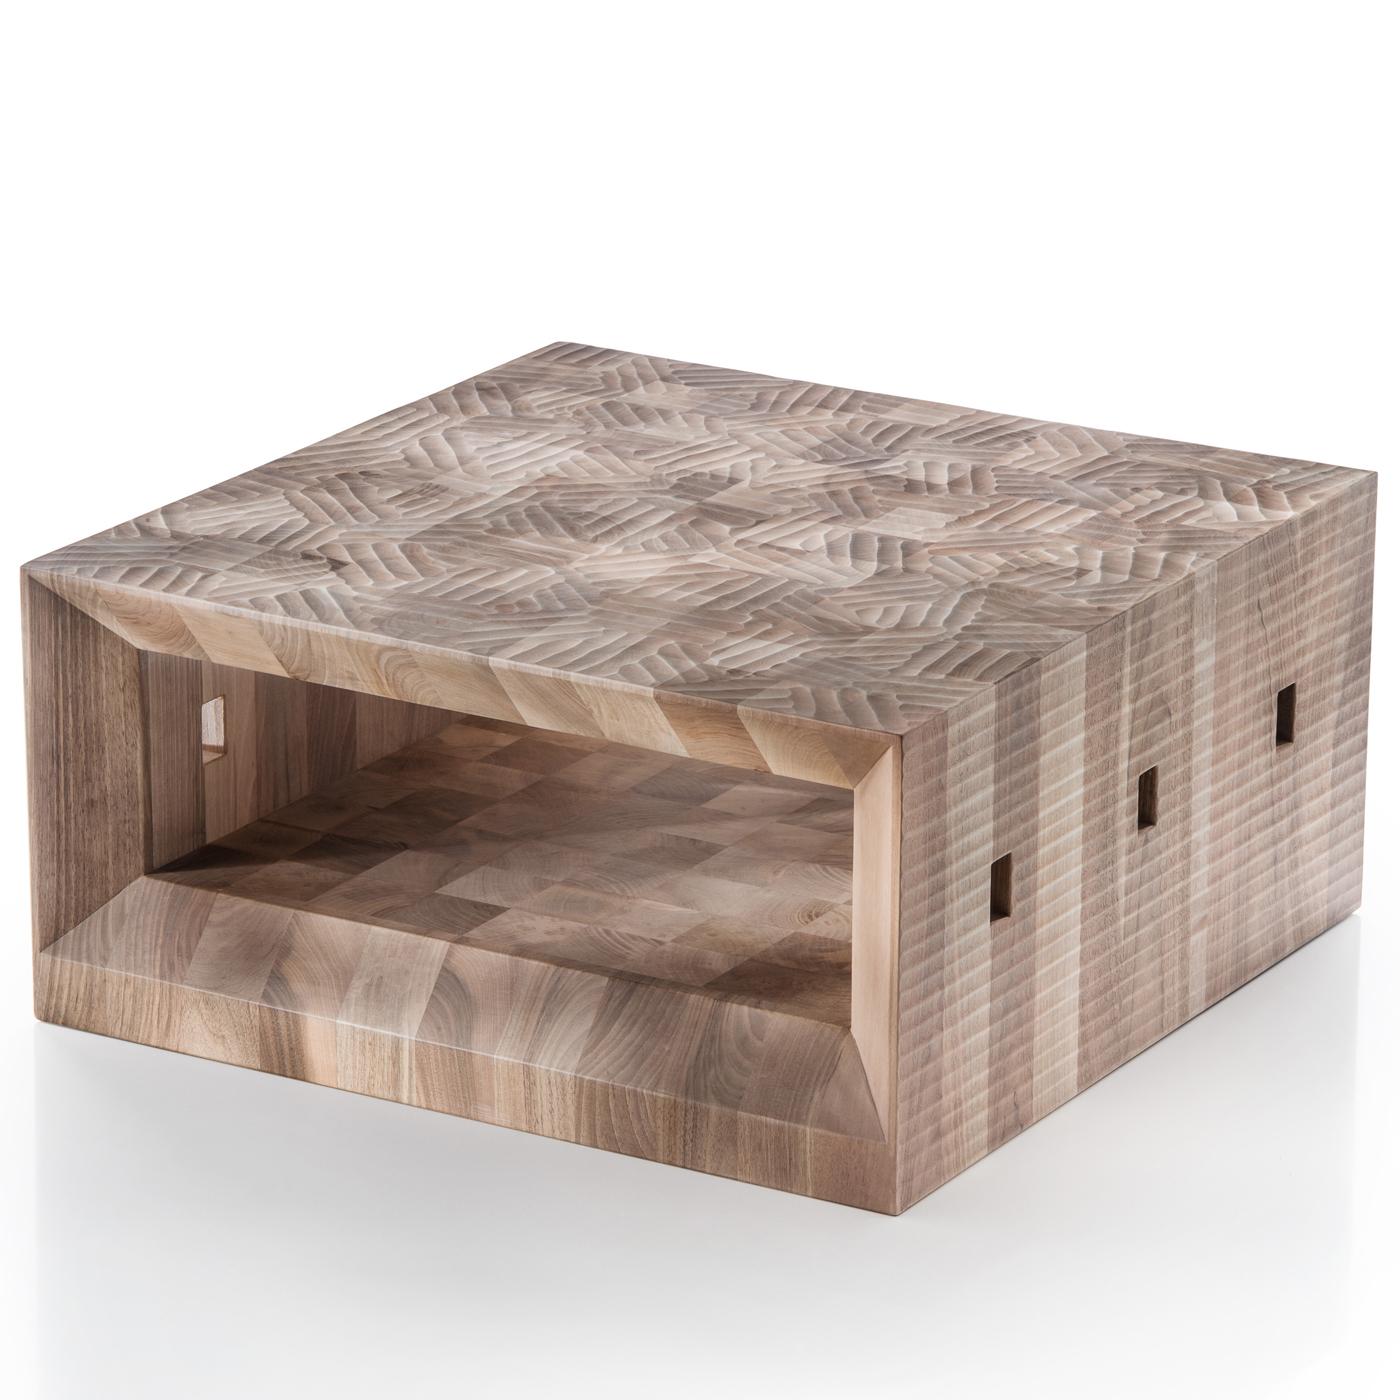 This striking coffee table is carved out of a single piece of Italian walnut wood and hand-finished in full relief with a gouge. The sides, inside, and top feature different decorative patterns in a harmony of geometrical and sinuous shapes.